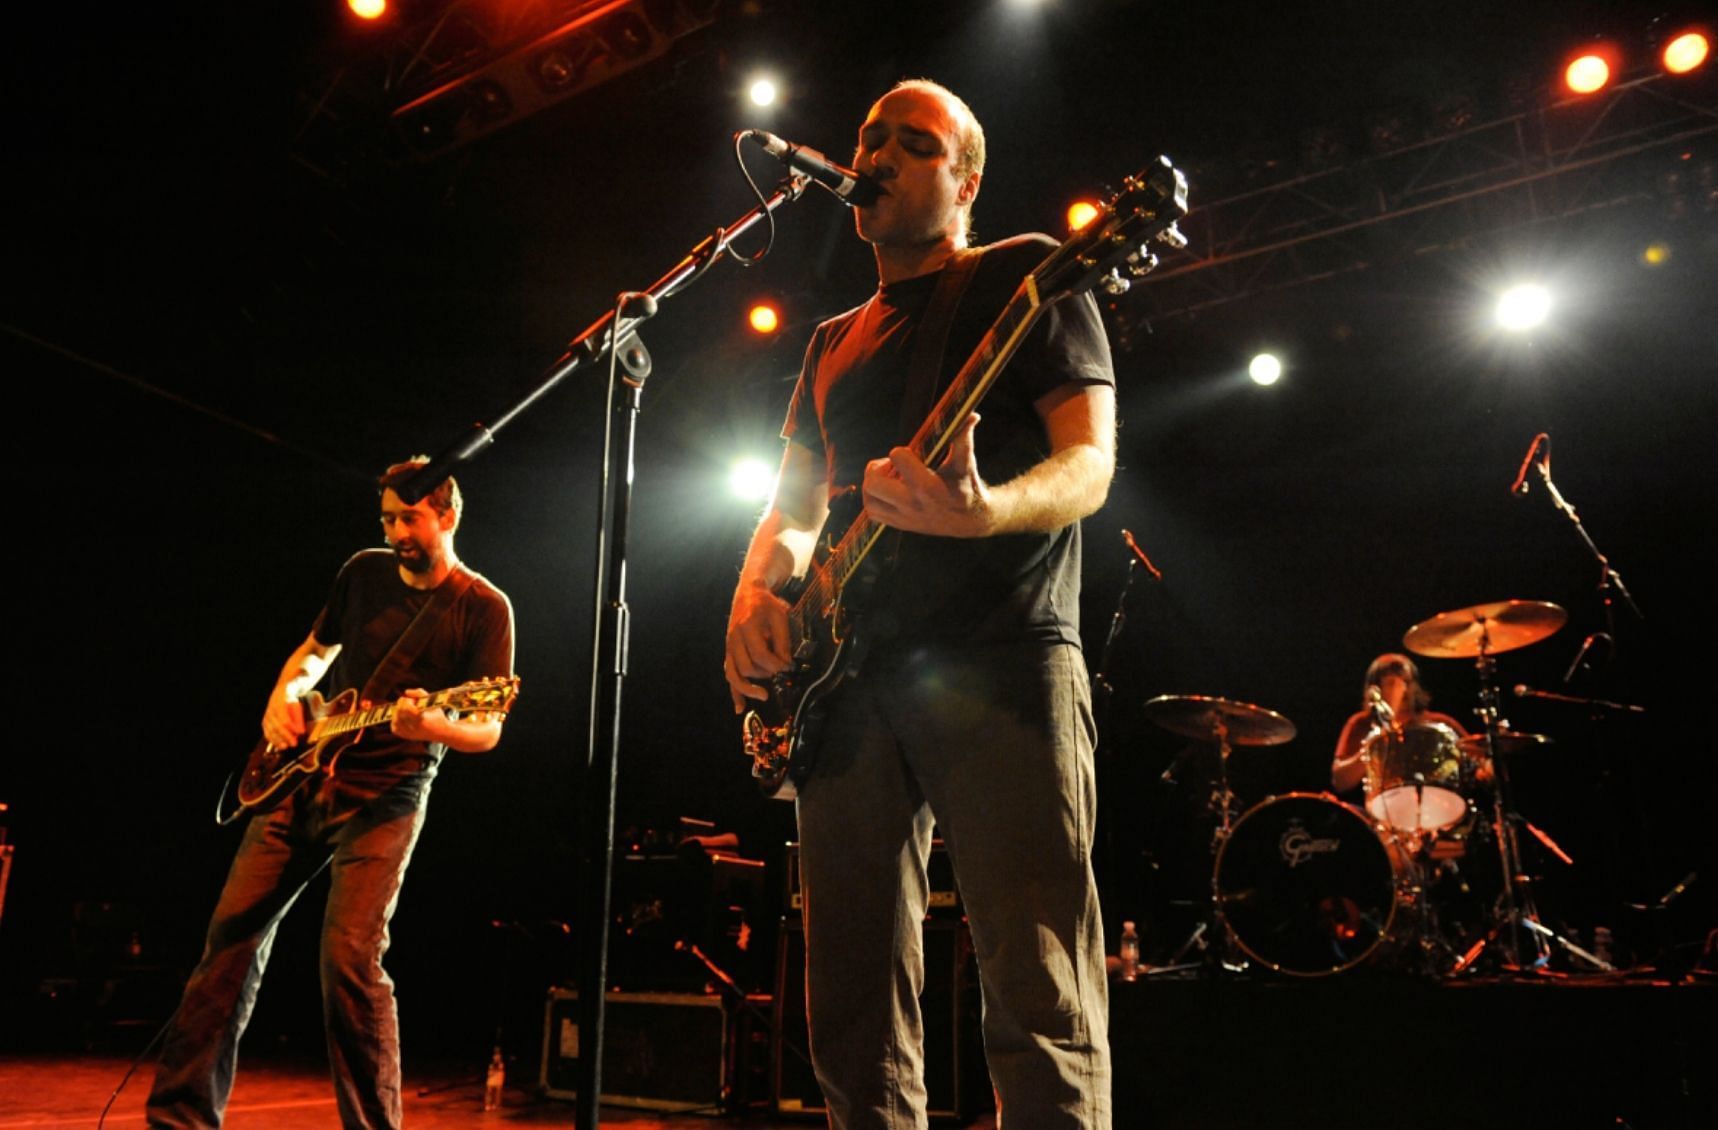 Sunny Day Real Estate are performing live after 10 years (Image via Nicky Sims / Getty Images)